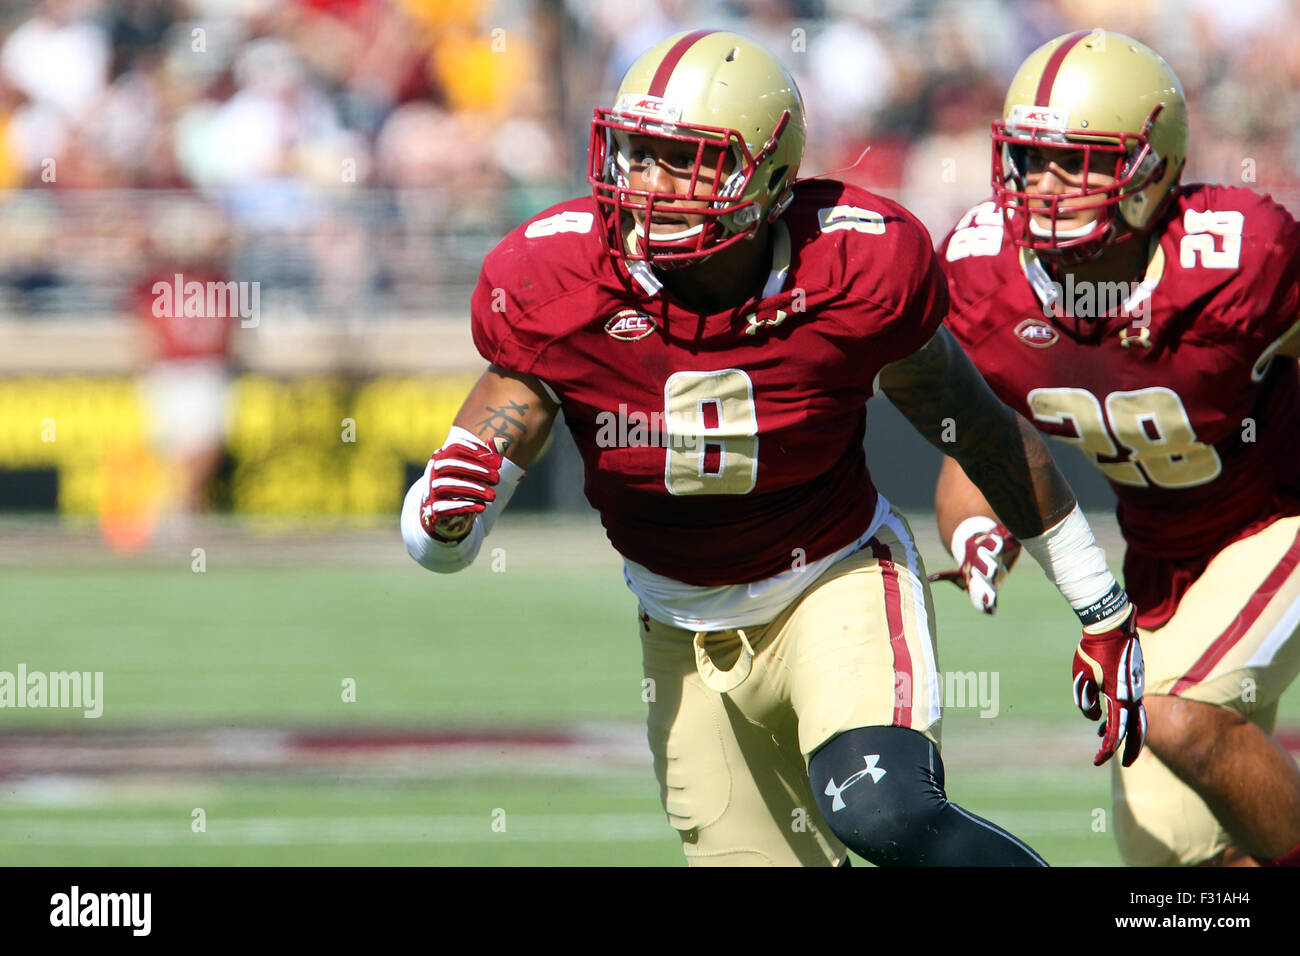 September 26, 2015; Chestnut Hill, MA, USA; Boston College Eagles defensive lineman Harold Landry (8) and Boston College Eagles linebacker Matt Milano (28) in action during the NCAA football game between the Boston College Eagles and Northern Illinois Huskies at Alumni Stadium. Boston College defeated Northern Illinois 17-14. Anthony Nesmith/Cal Sport Media Stock Photo